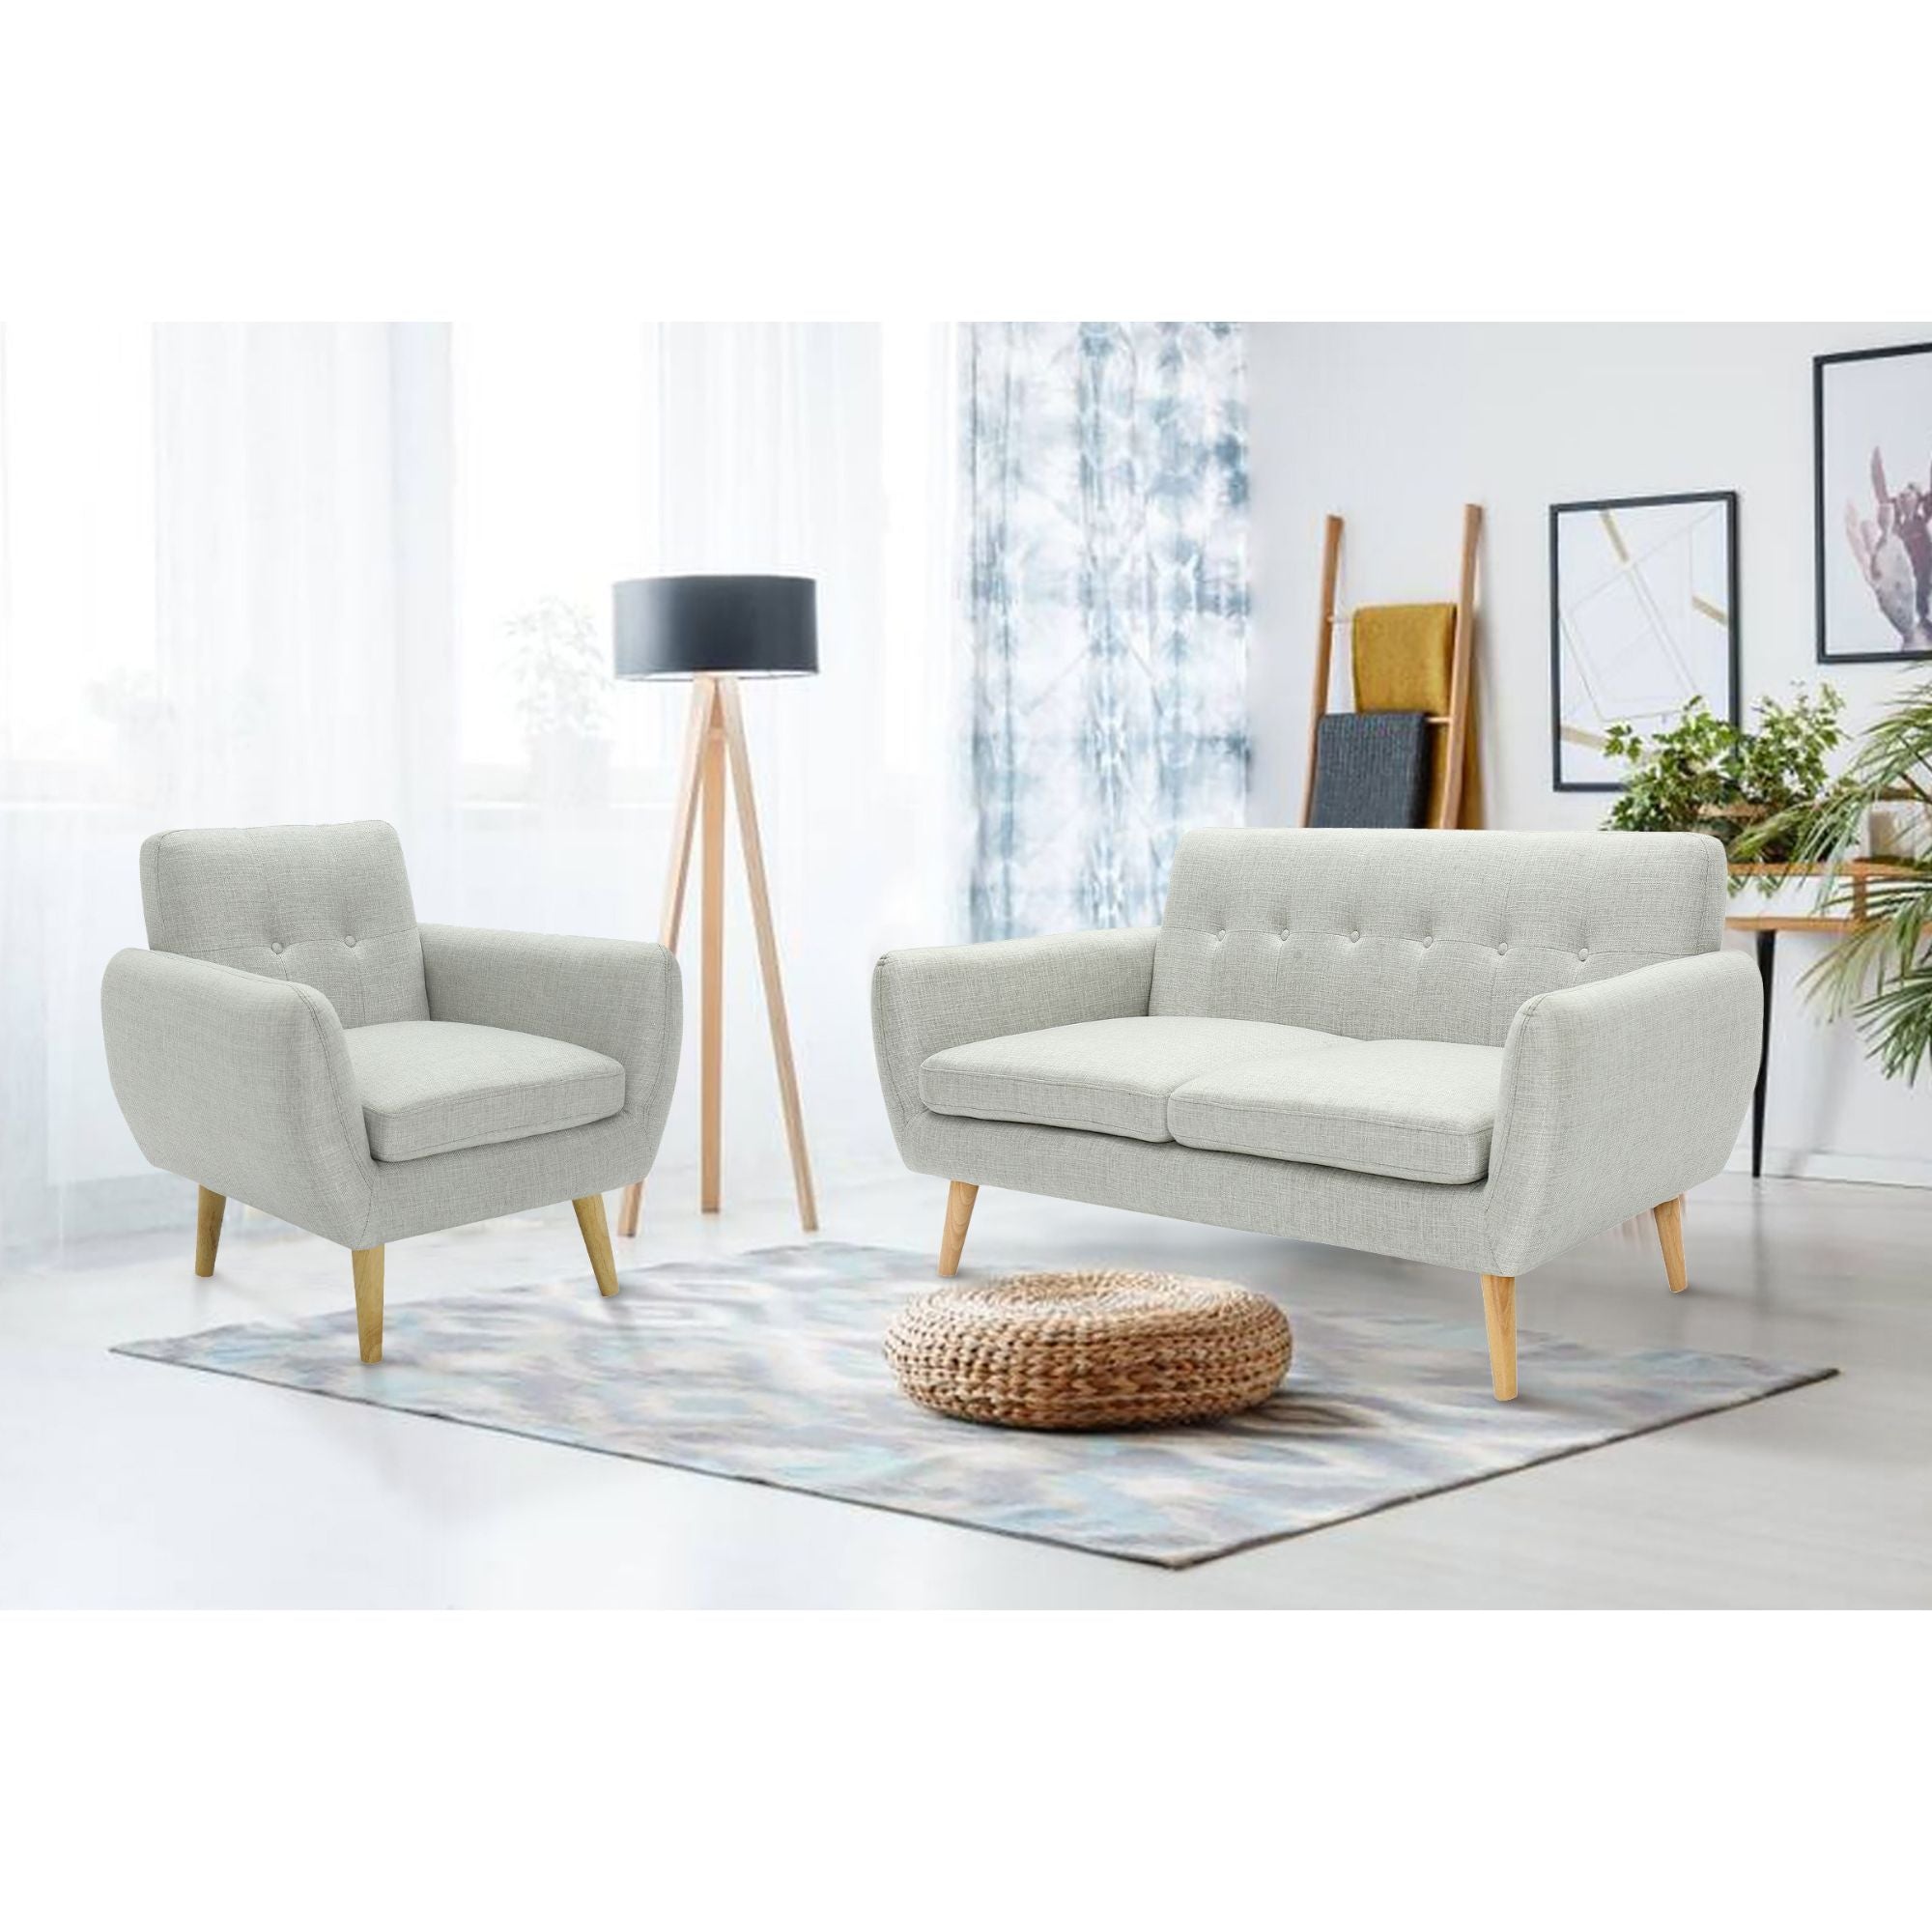 Dane 3 + 1 + 1 Seater Fabric Upholstered Sofa Armchair Lounge Couch - Light Grey